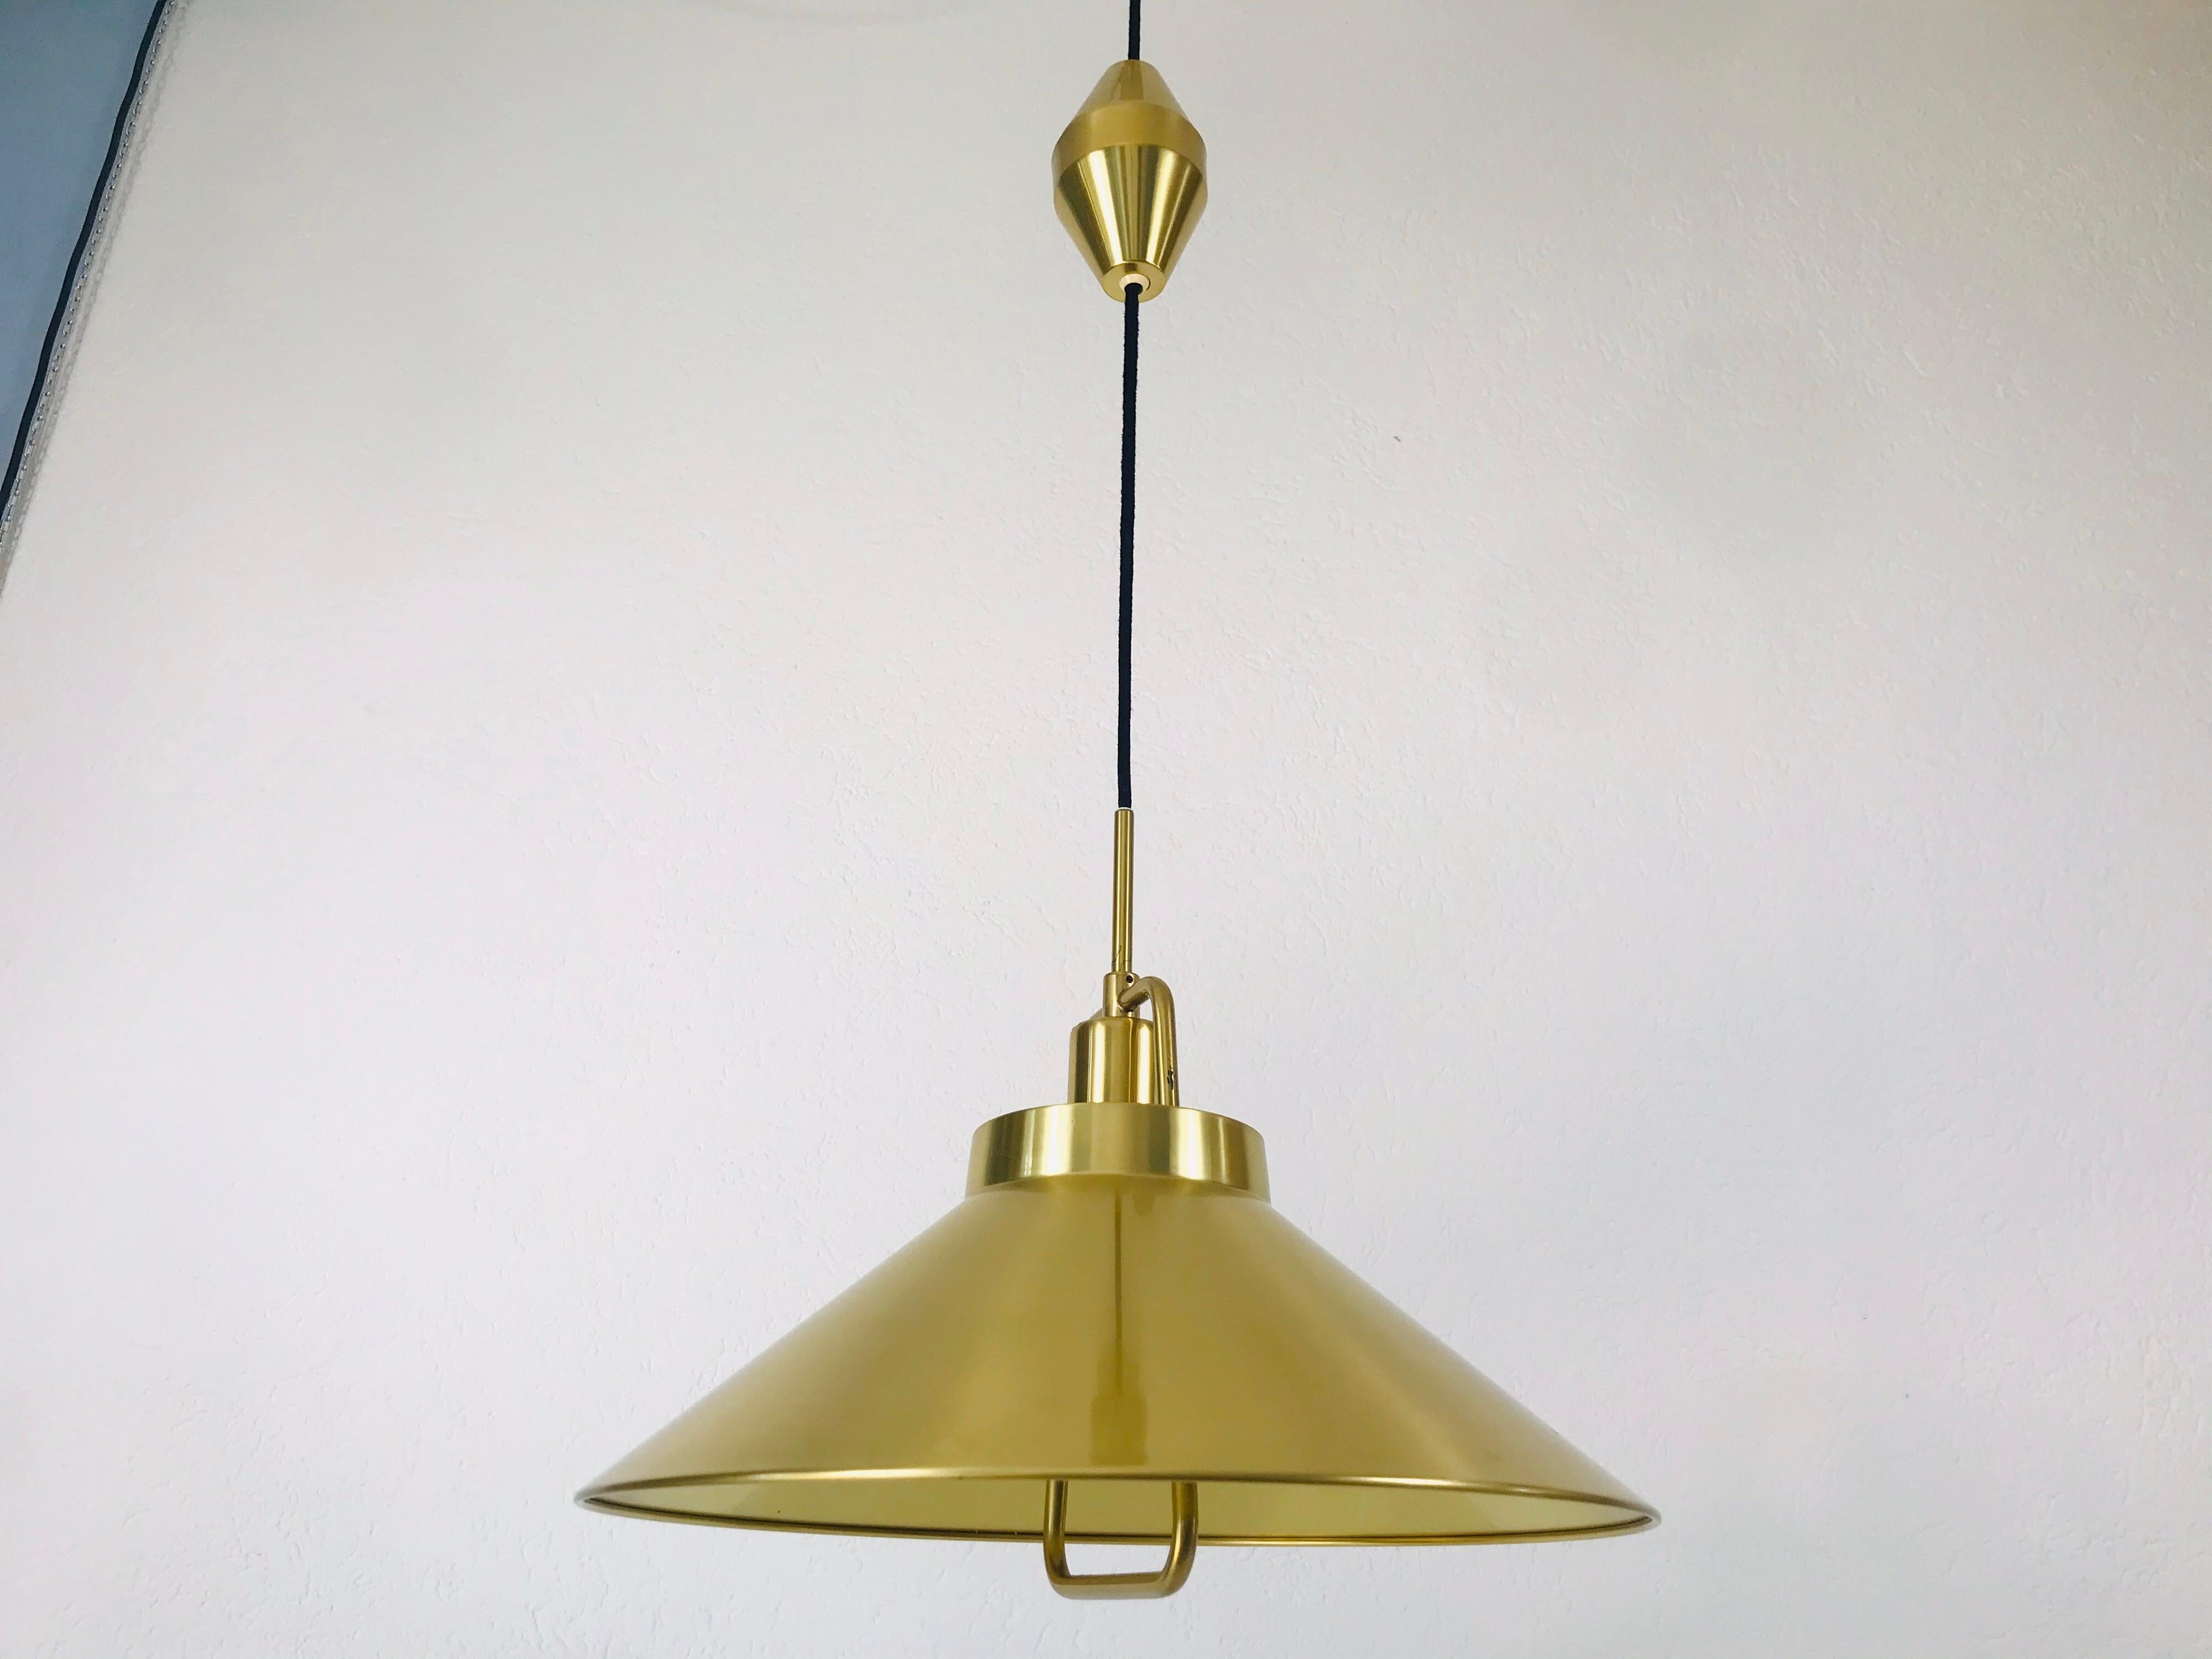 Gold pendant lamp by Fritz Schlägel made in Denmark in the 1970s. It is made from thin aluminium and brass

The light requires one E27 light bulb. Very good vintage condition.

Free worldwide standard shipping. Express shipping on request.
  